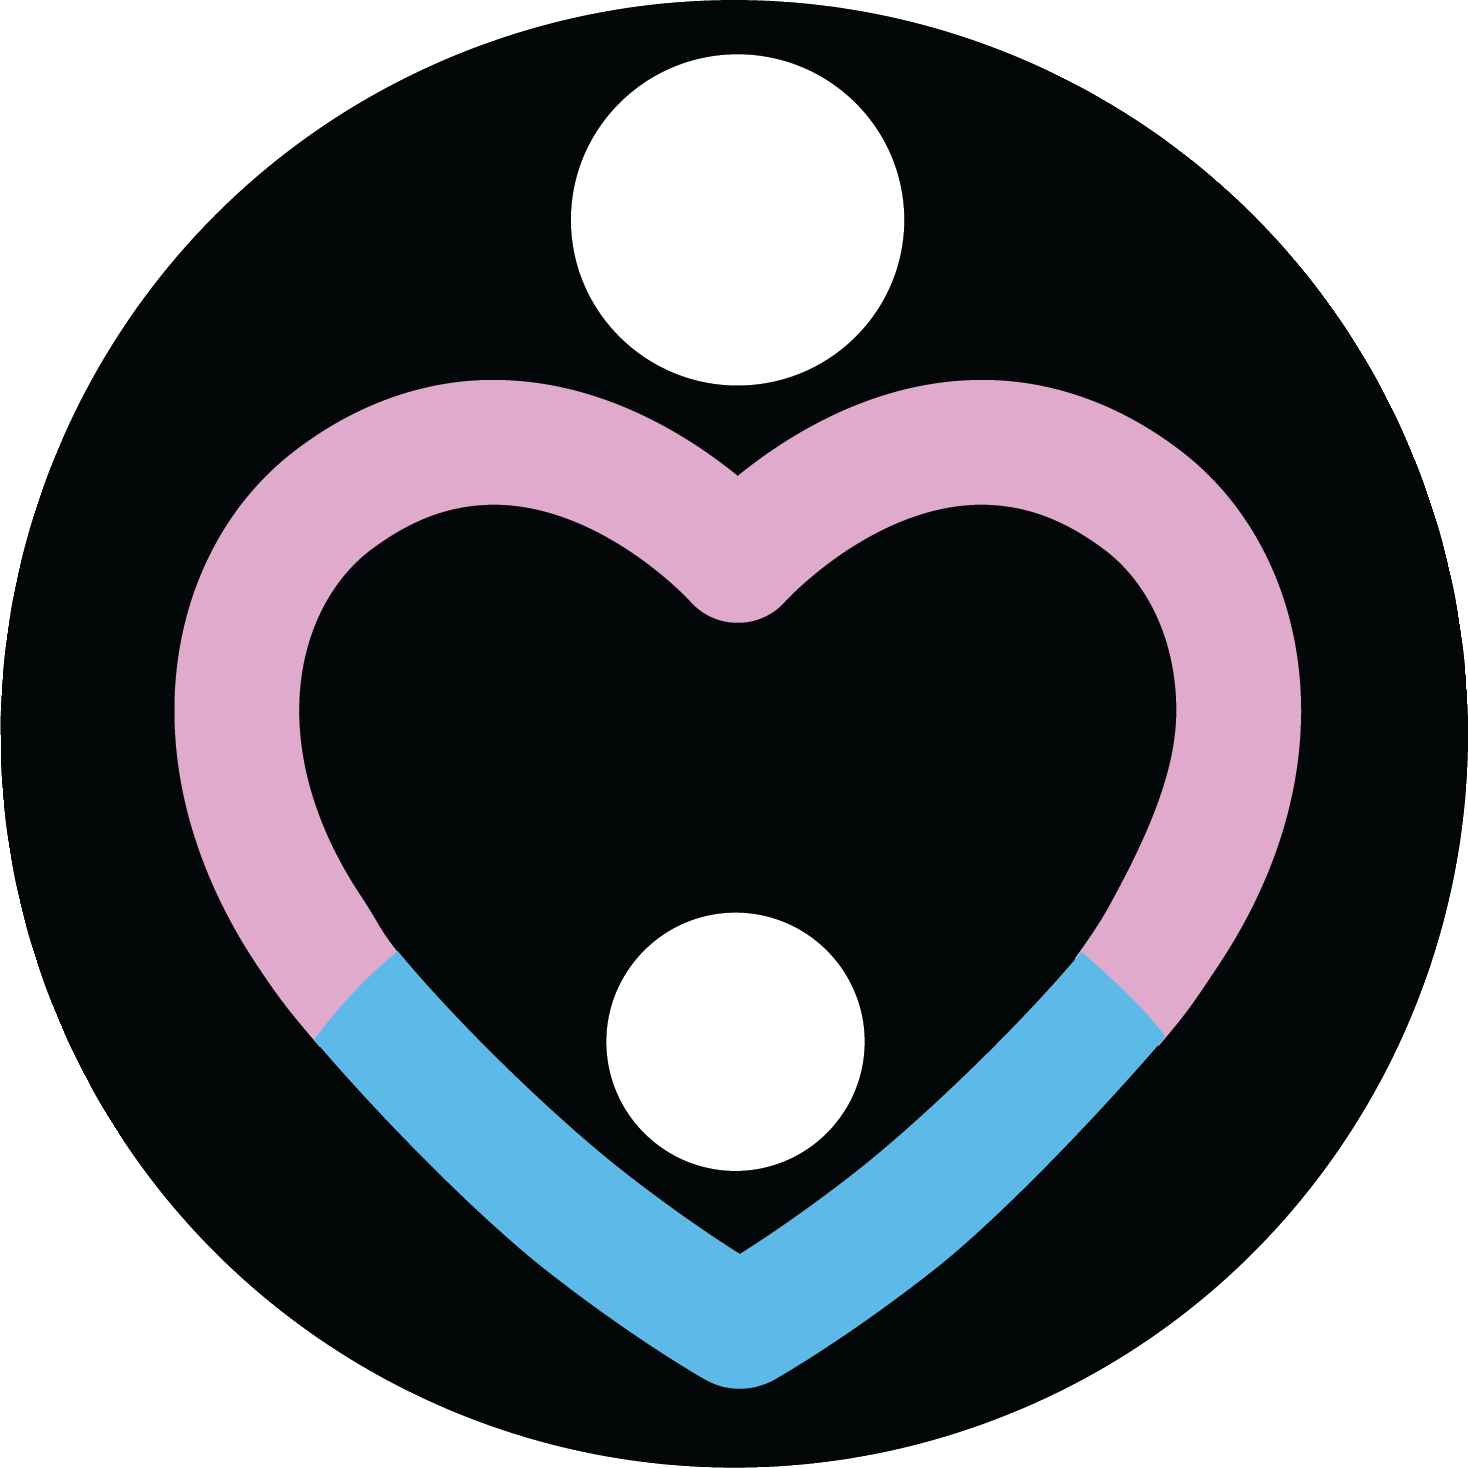 Logo image of pink and blue heart with two white dots